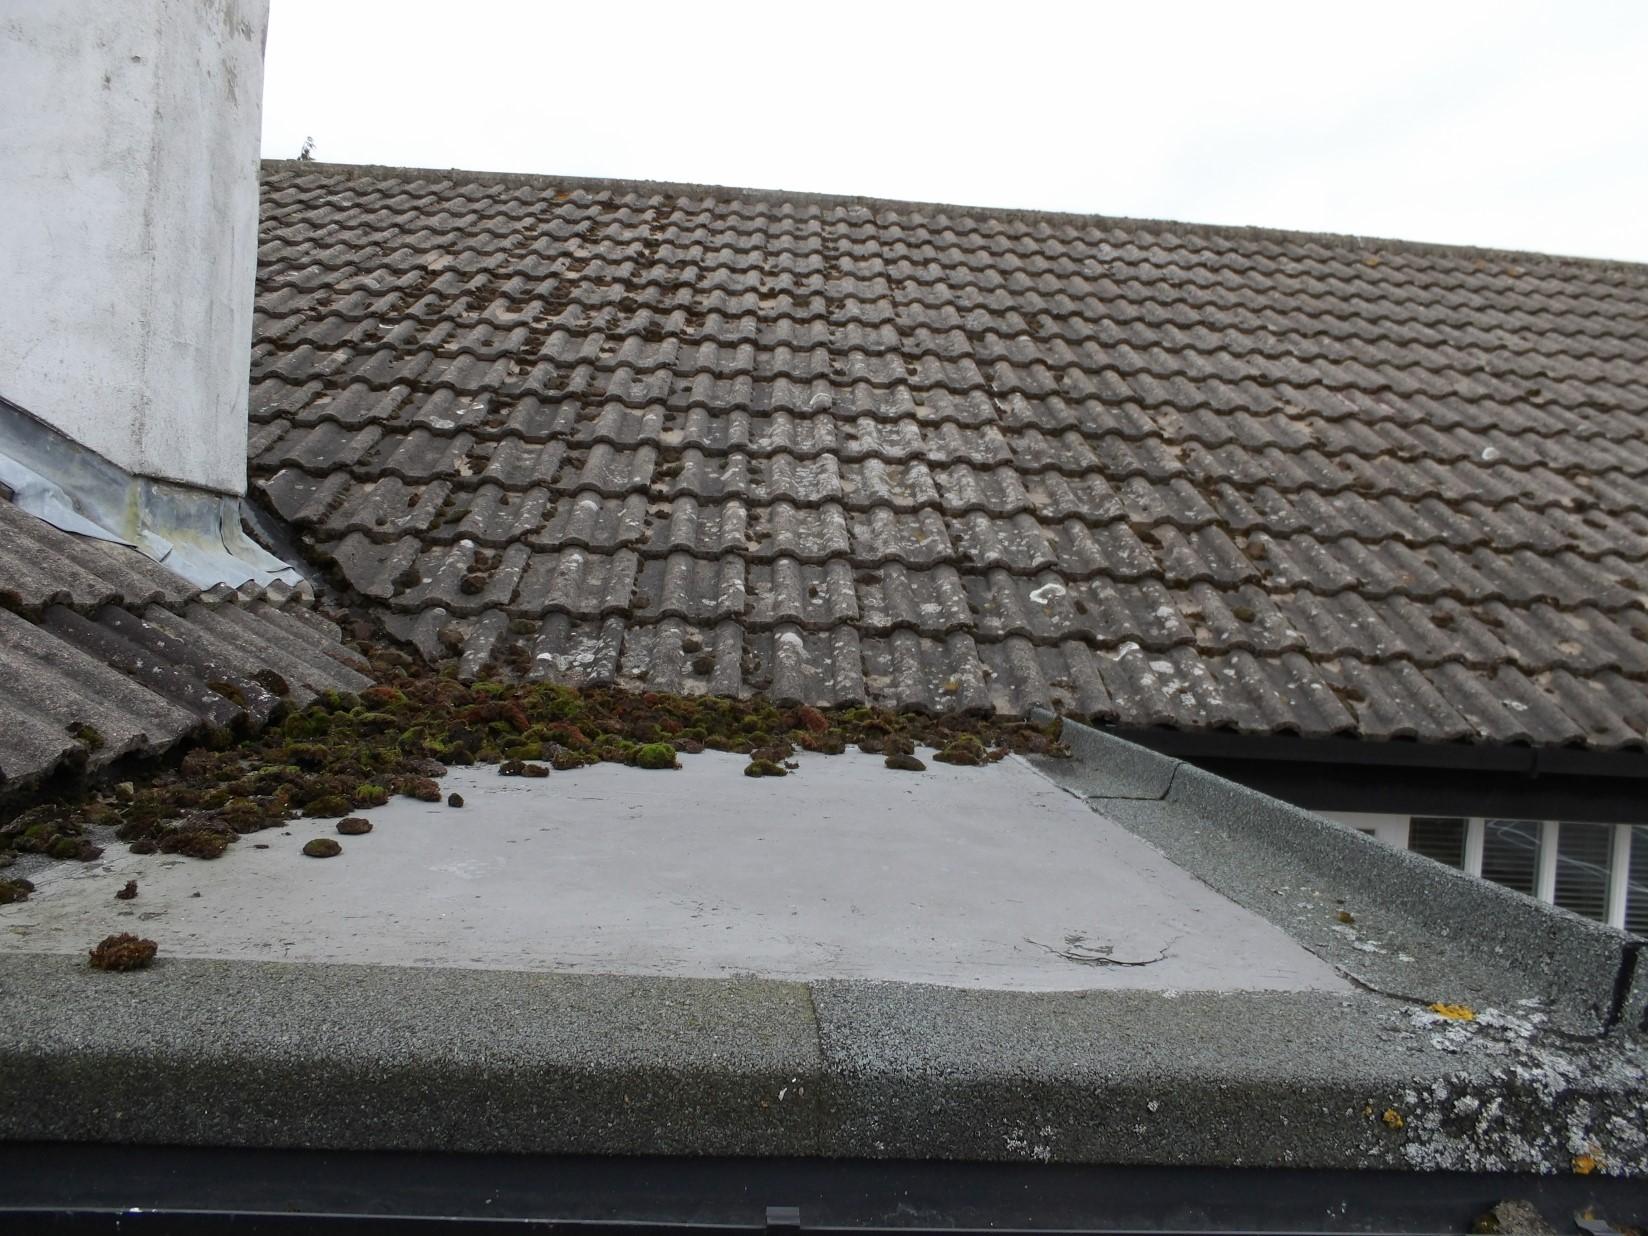 Moss on flat roof which should be removed.